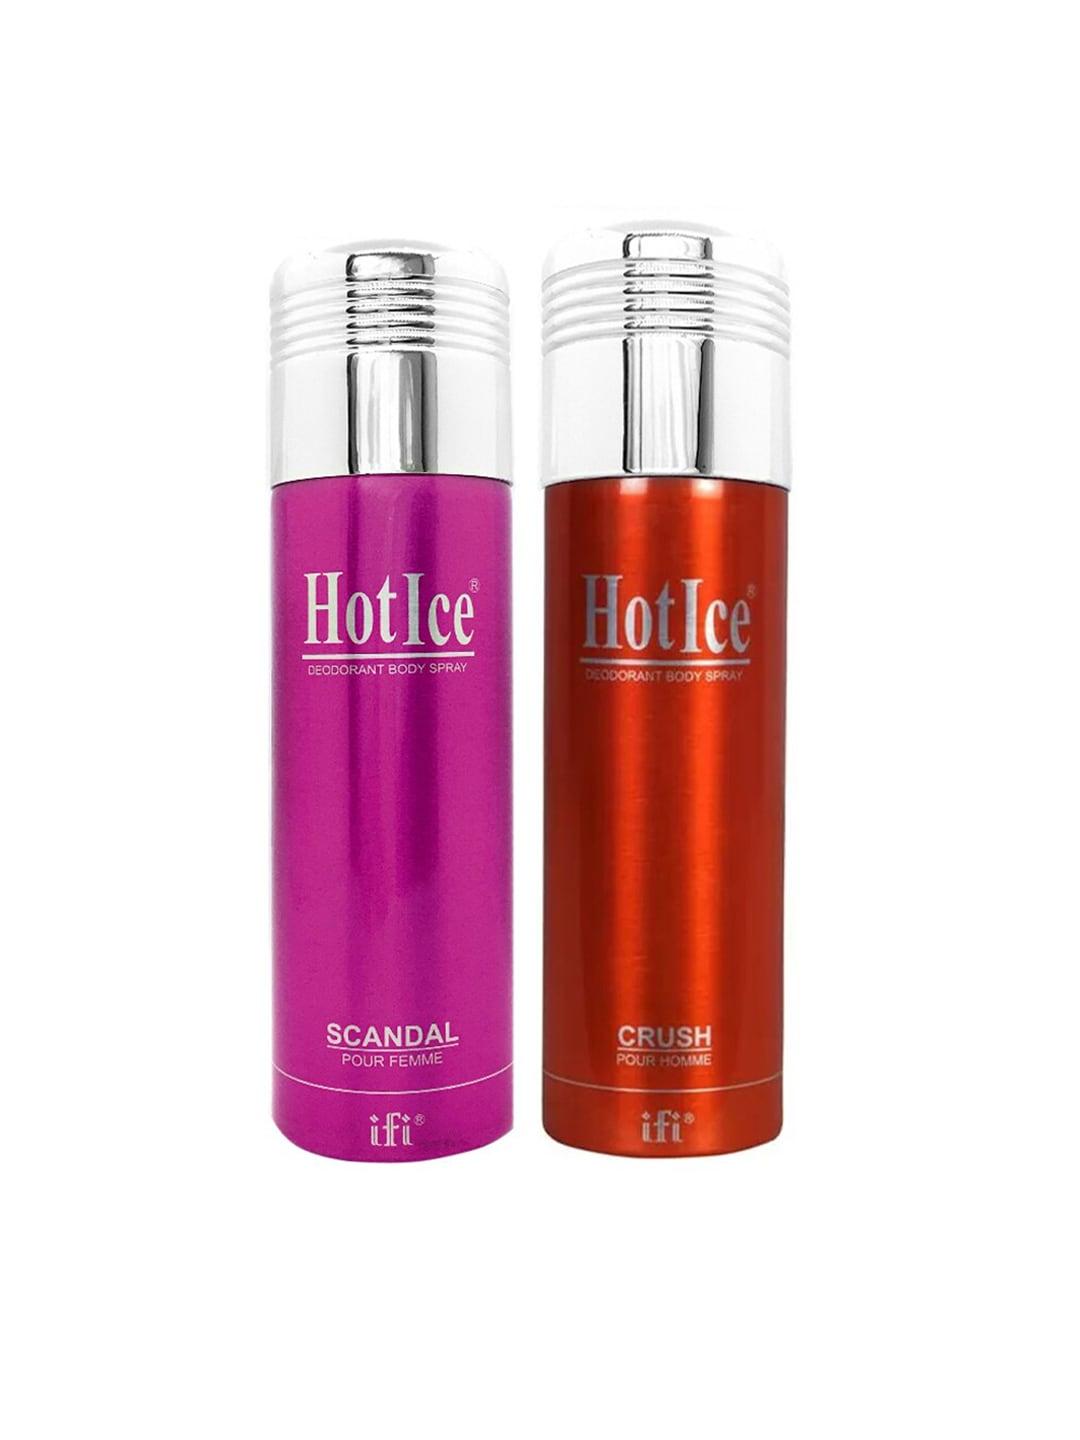 Hot Ice Scandal Fomme & Crush Homme Deodorant - 200ml Each